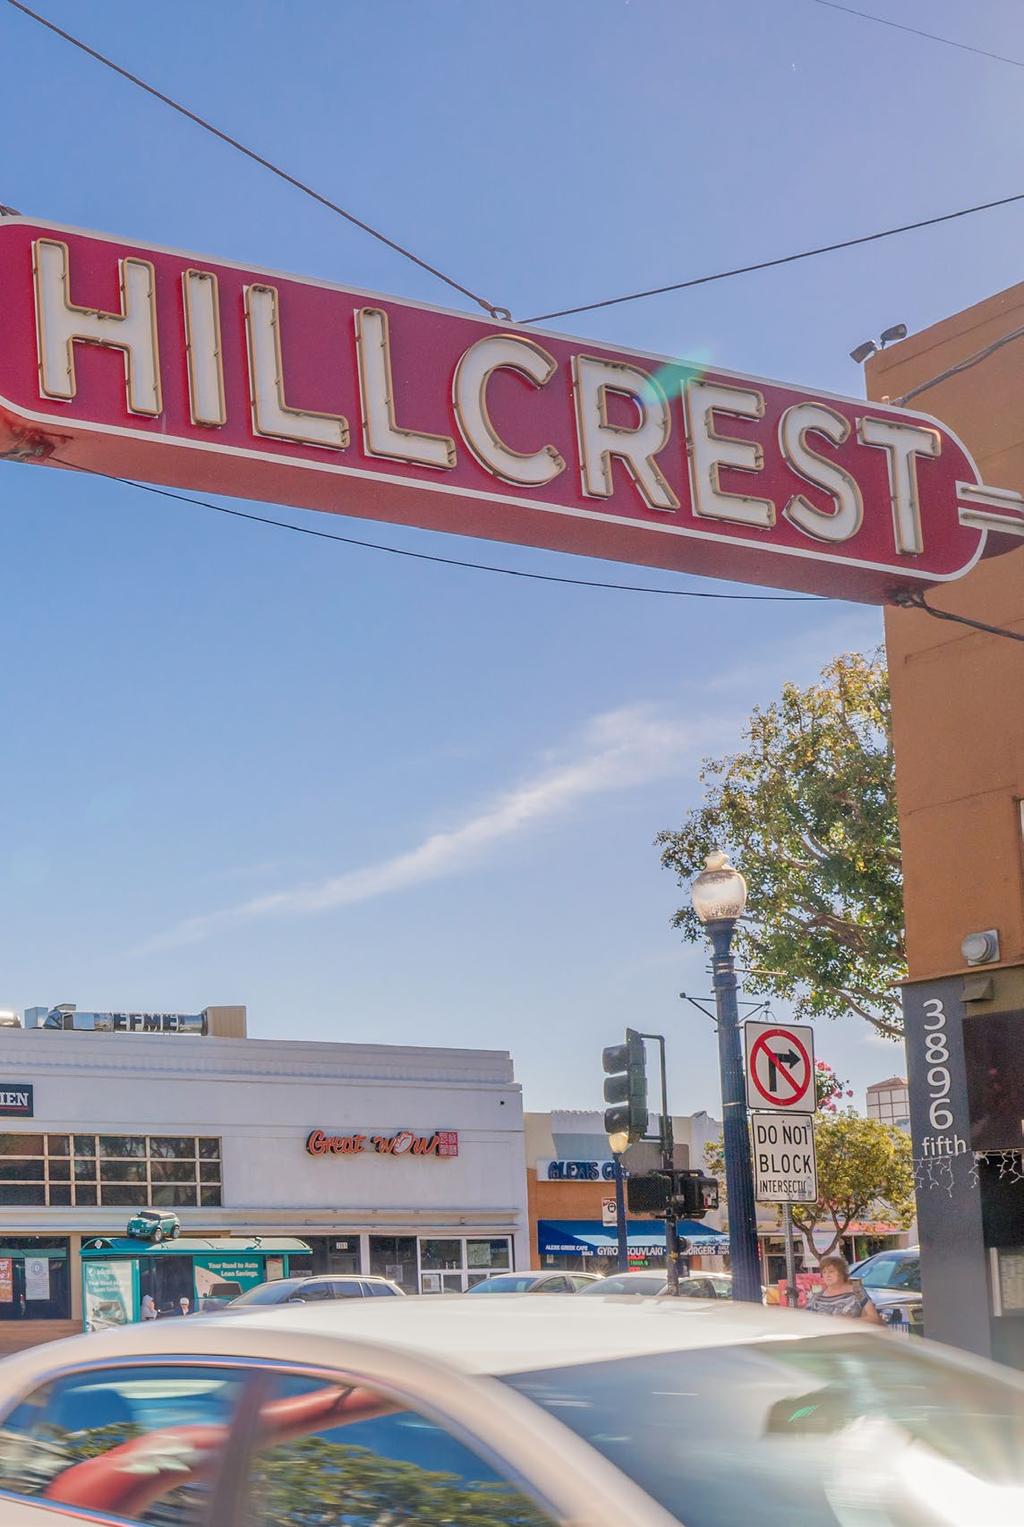 EAST WASHINGTON STREET uuuuu HILLCREST HAS BEEN RECOGNIZED AS A Great Neighborhood in America BY THE AMERICAN PLANNING ASSOCIATION uuuuu 4TH AVENUE CHECK MATE LOS PANCHOS MEXICAN TRUE REST FLOAT SPA